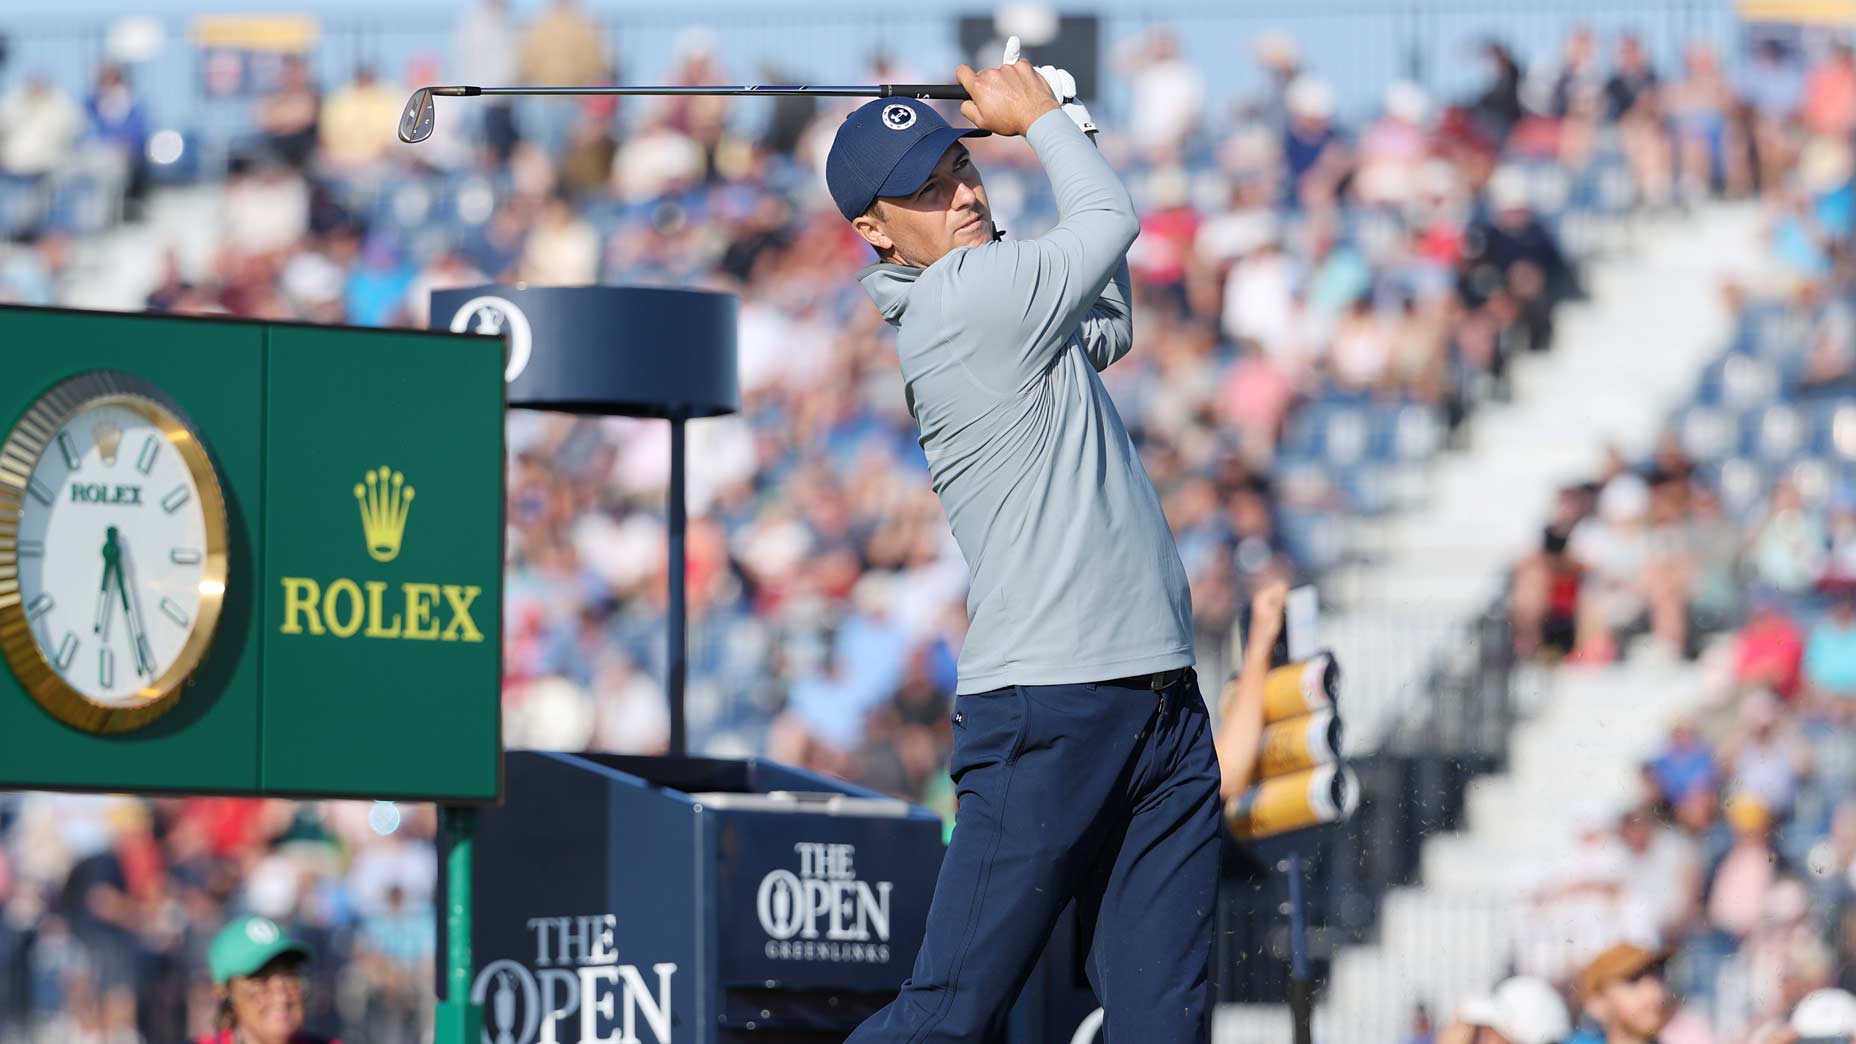 The Open 2021 / How to watch the 2021 Open Championship A TV Guide for